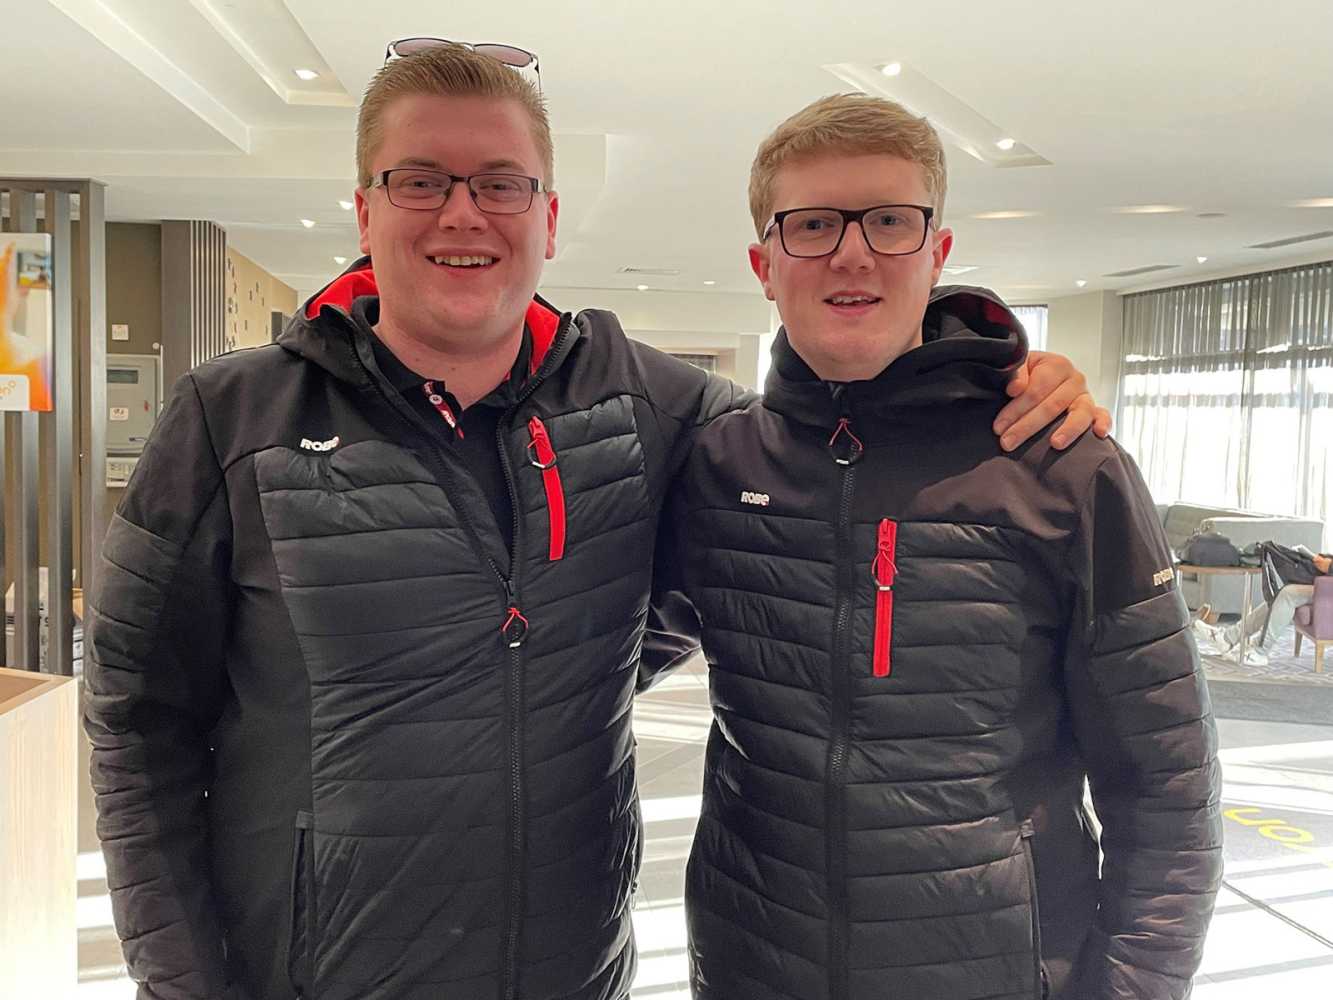 Gavin Mooney (left) is Robe Ireland’s new sales and business development representative; Will Blackie has joined Robe UK’s technical sales support team